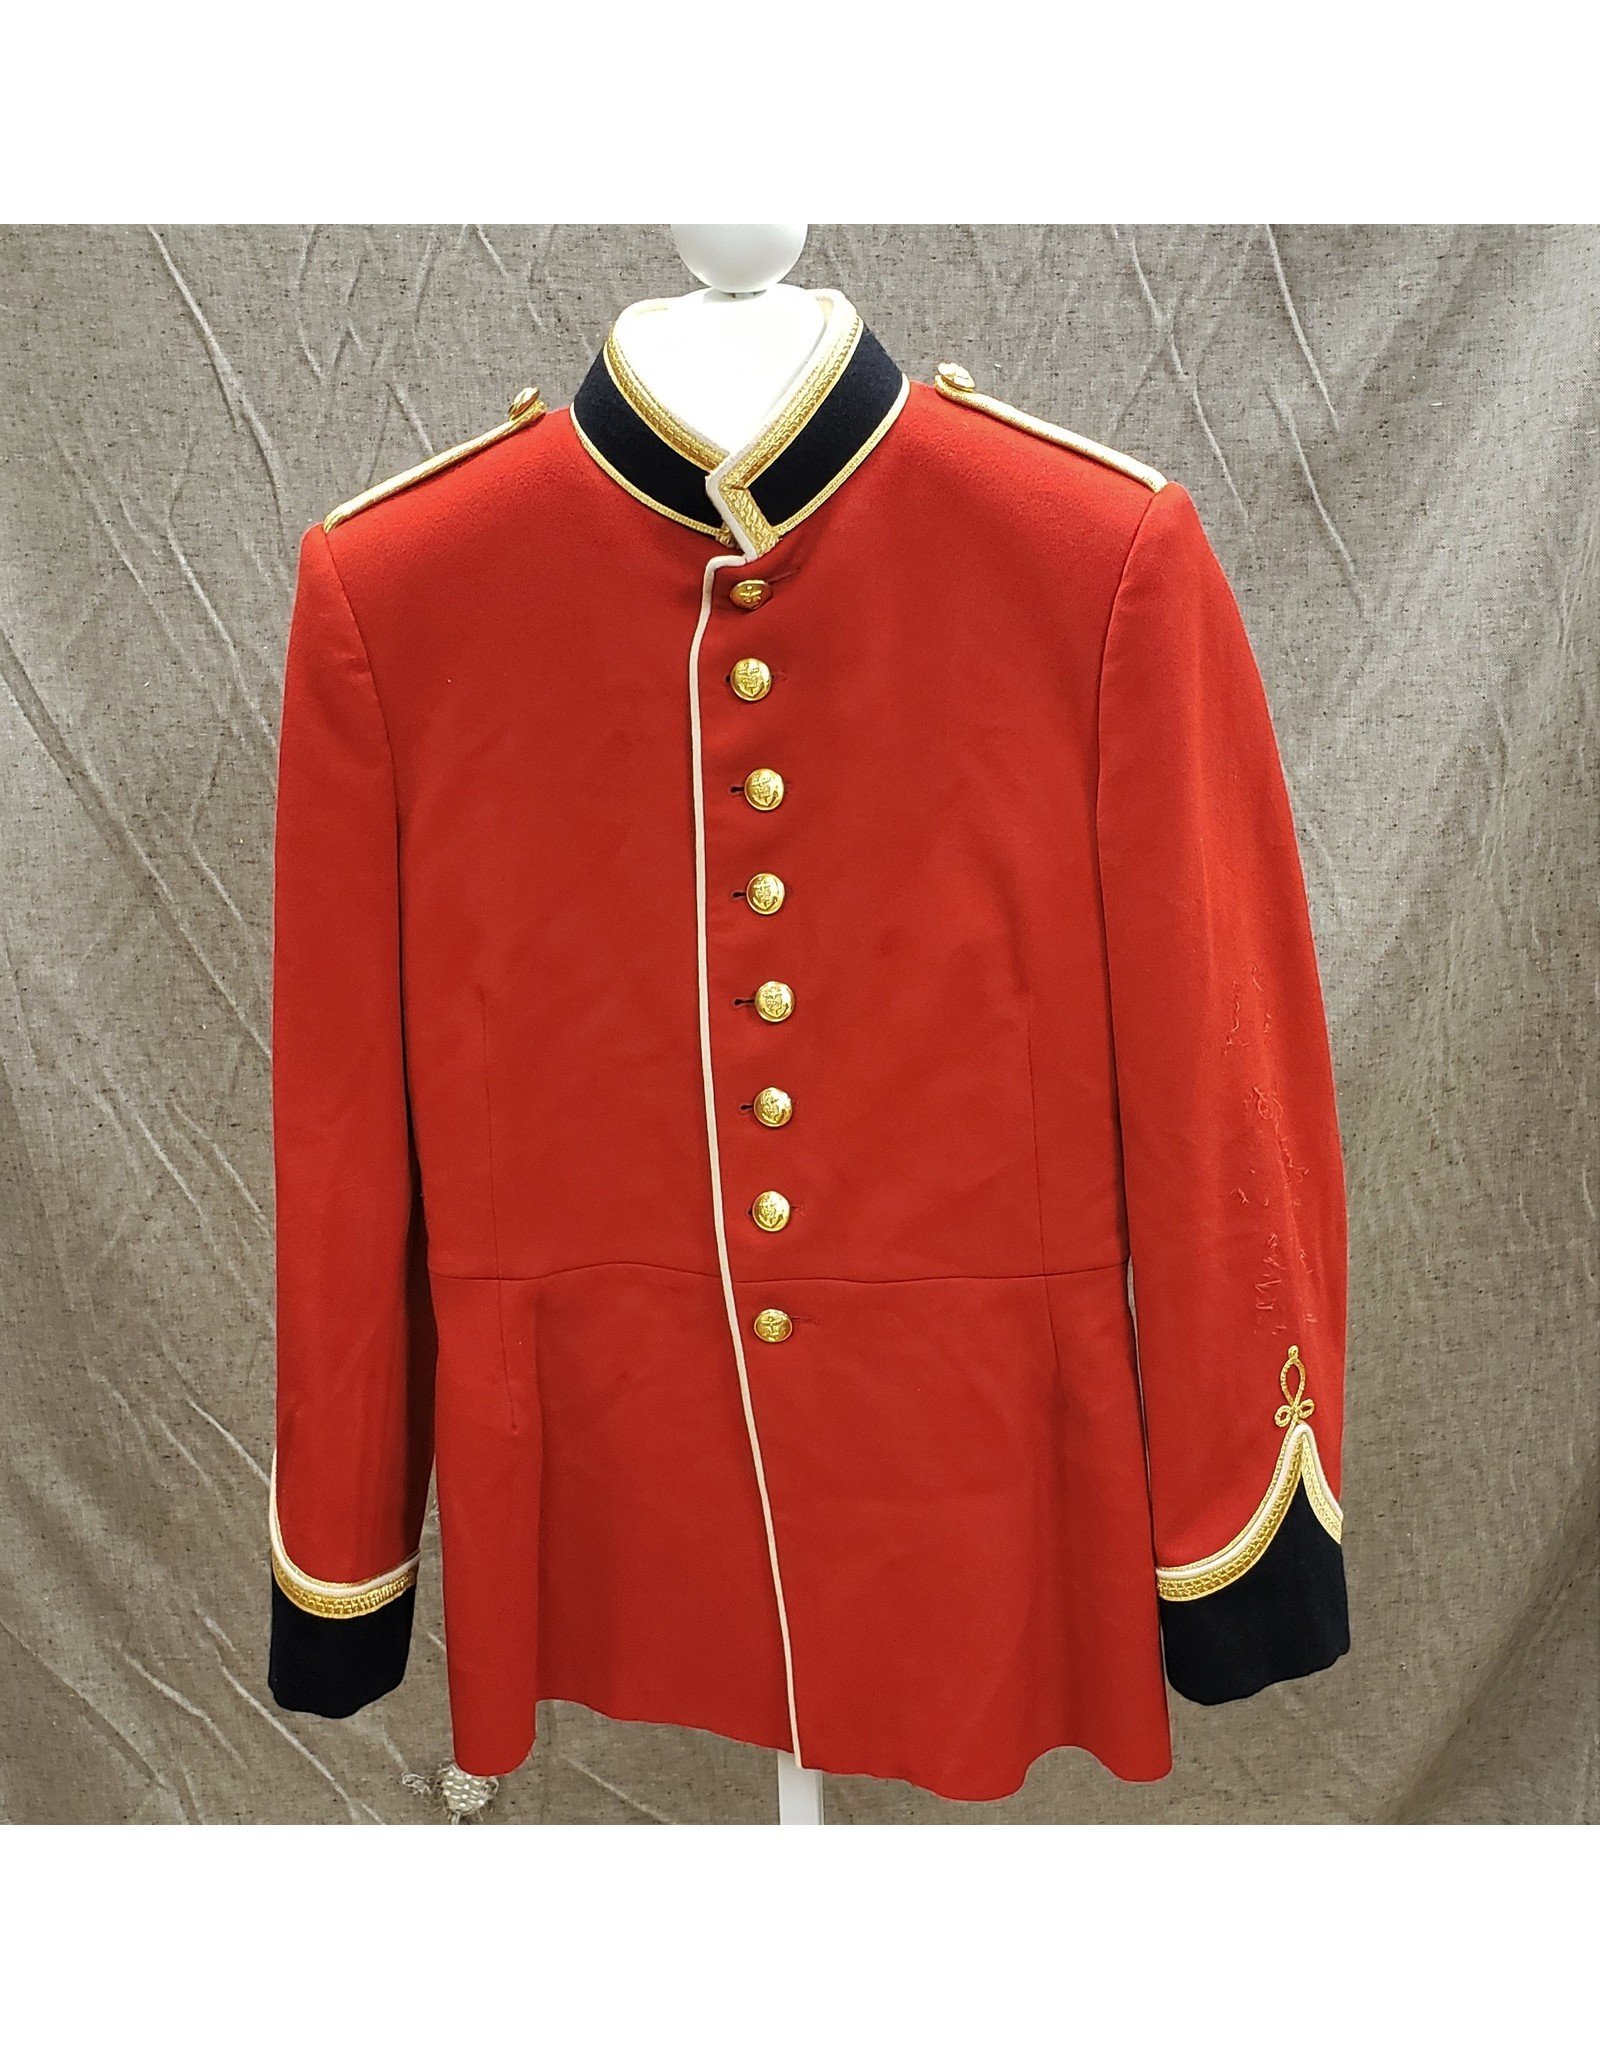 CANADIAN SURPLUS RMC  ROYAL MILITARY COLLEGE RED DRESS TUNIC